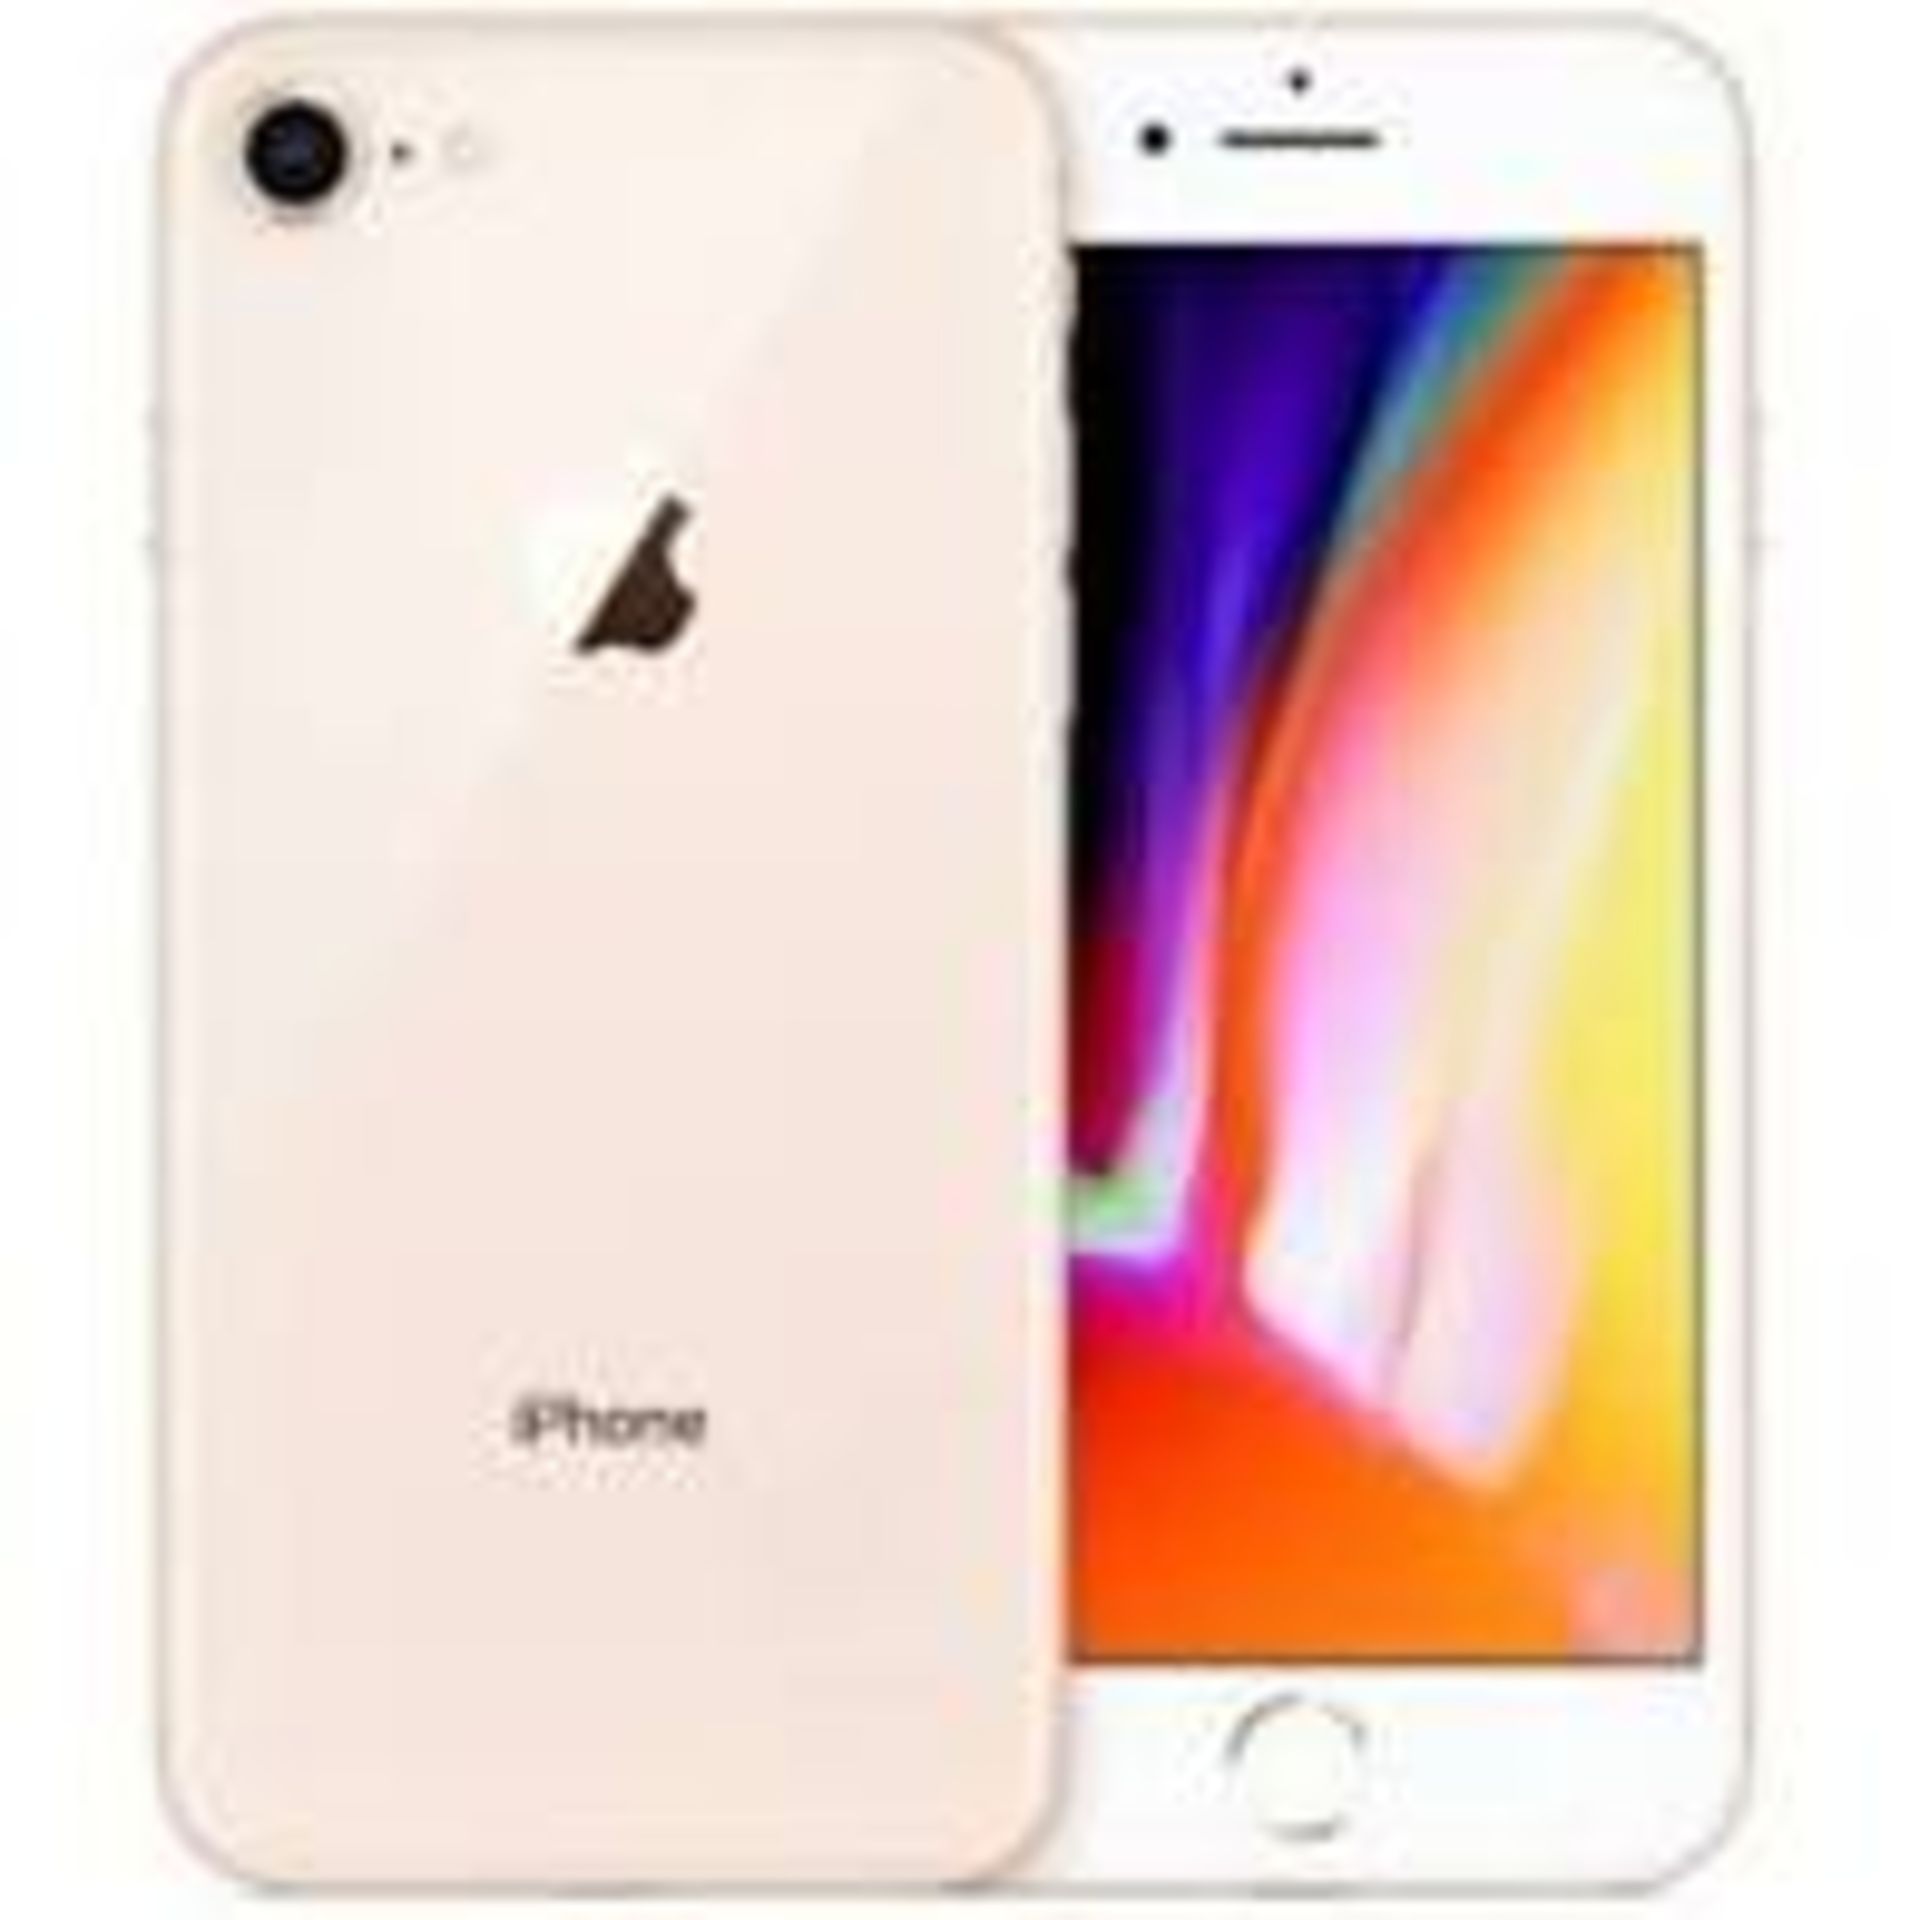 Apple iPhone 8 128GB Gold. RRP £480 - Grade A - Perfect Working Condition - (Fully refurbished and